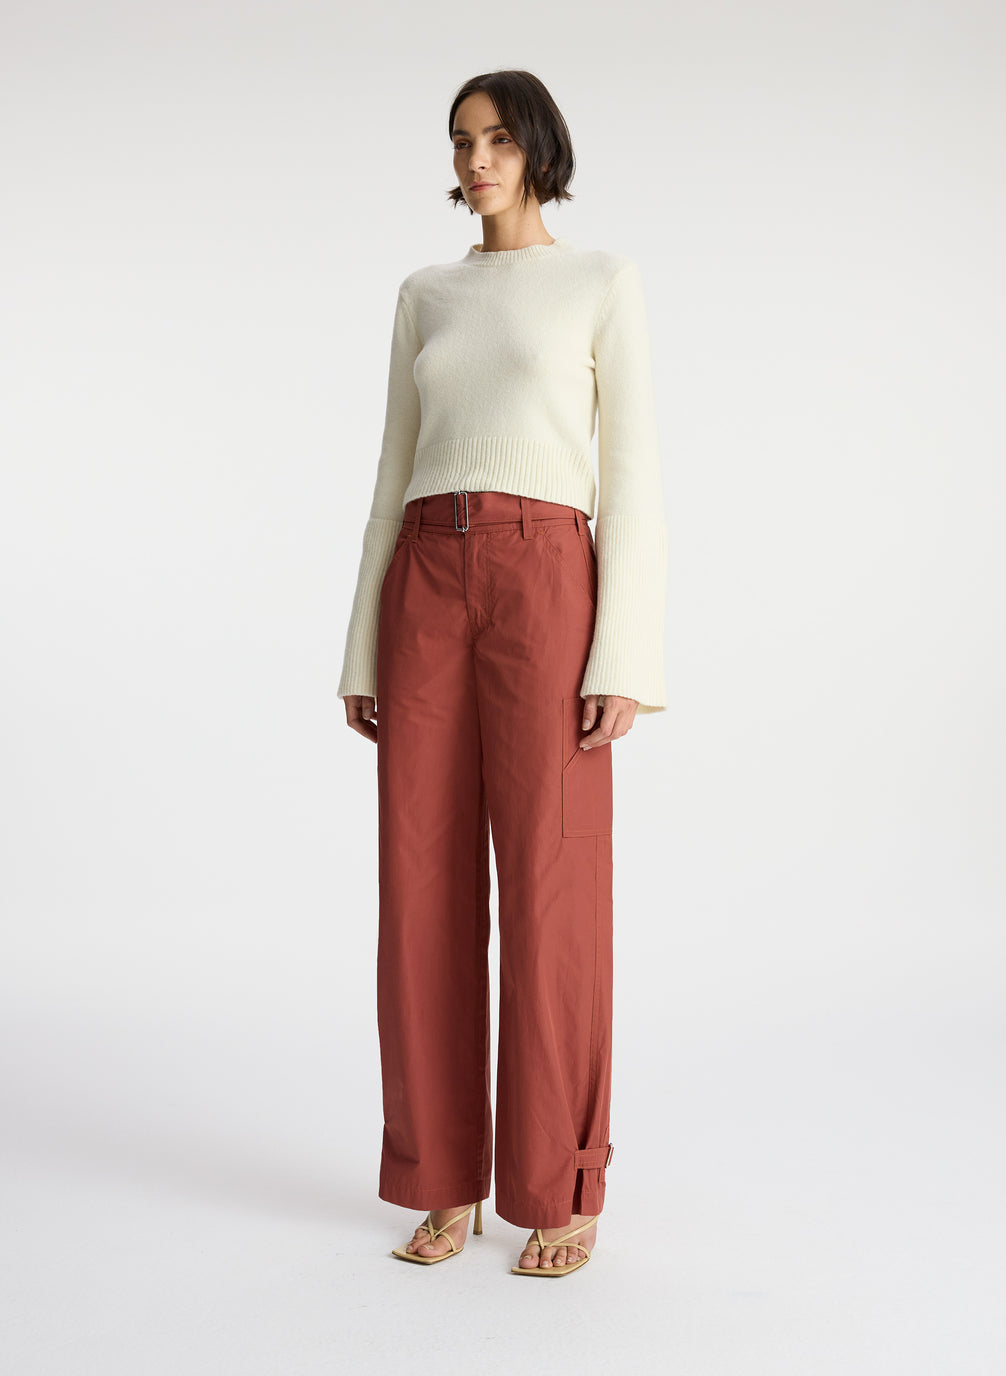 side view of a woman wearing a cream sweater and brown pants